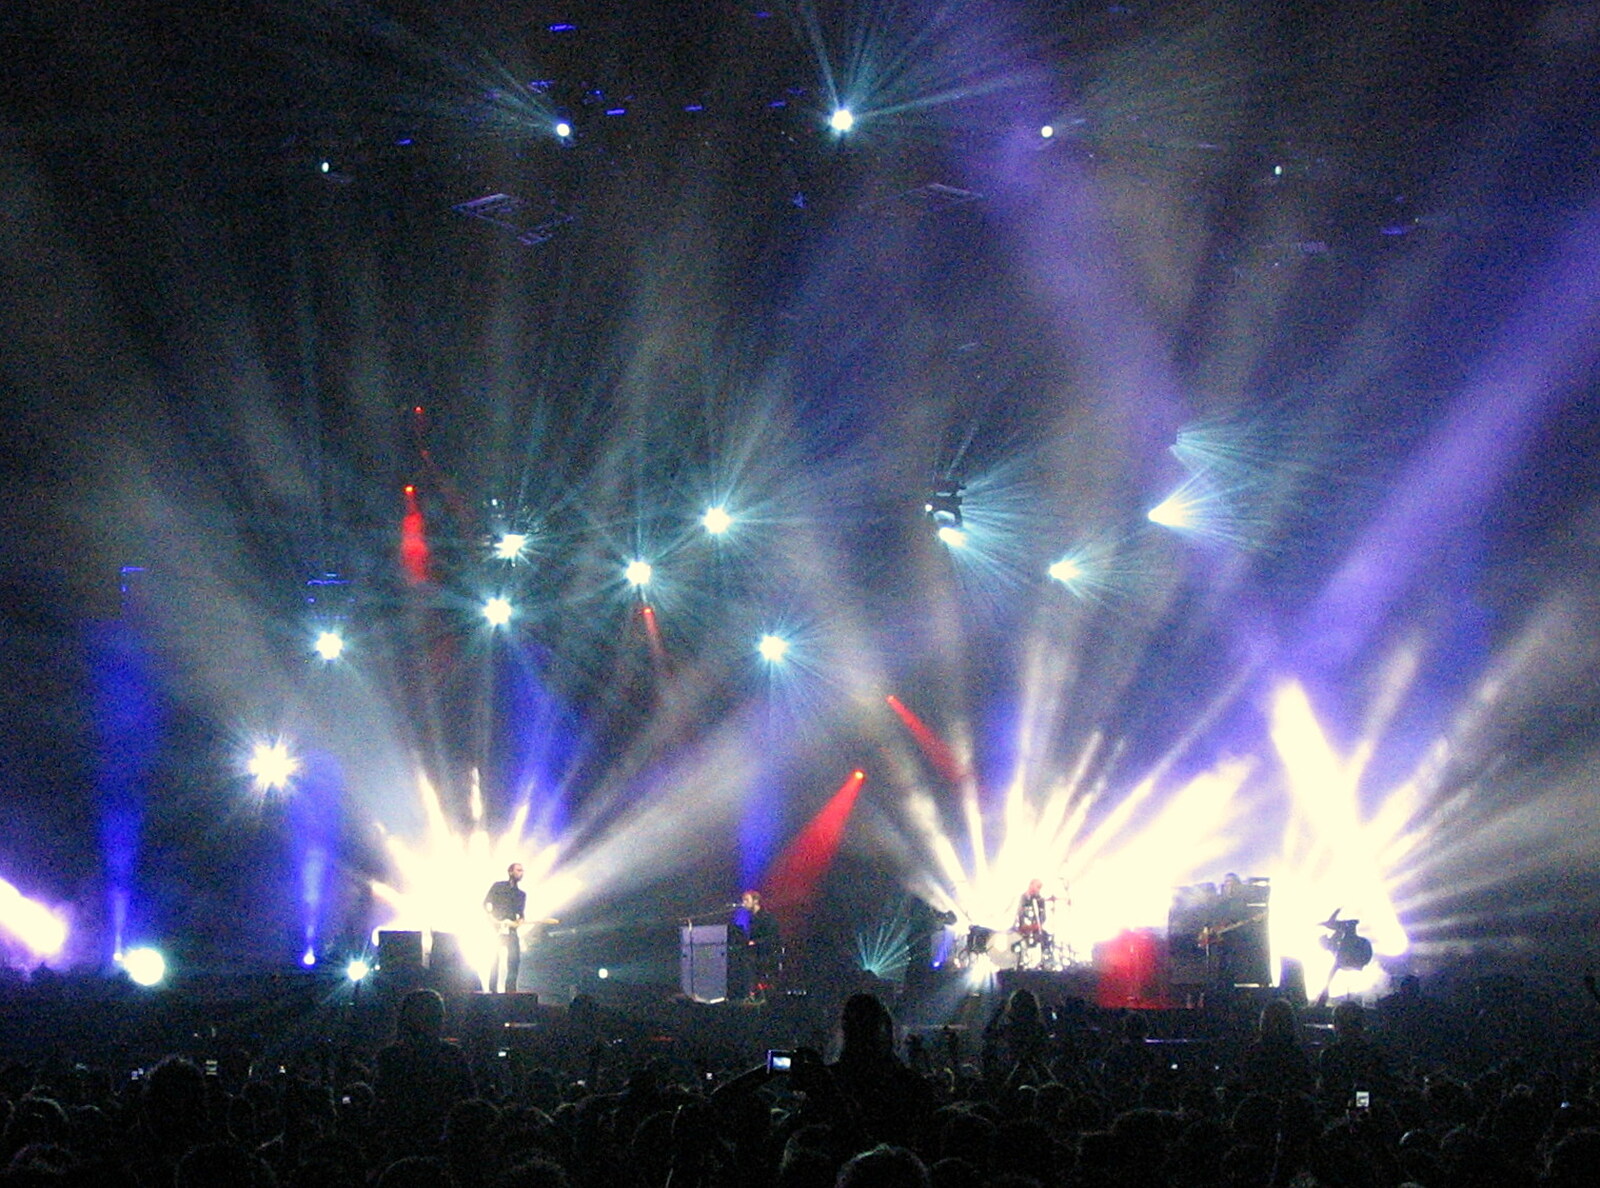 An impressive light show from Coldplay Live at Crystal Palace, Diss Publishing and Molluscs, Diss and London - 28th June 2005